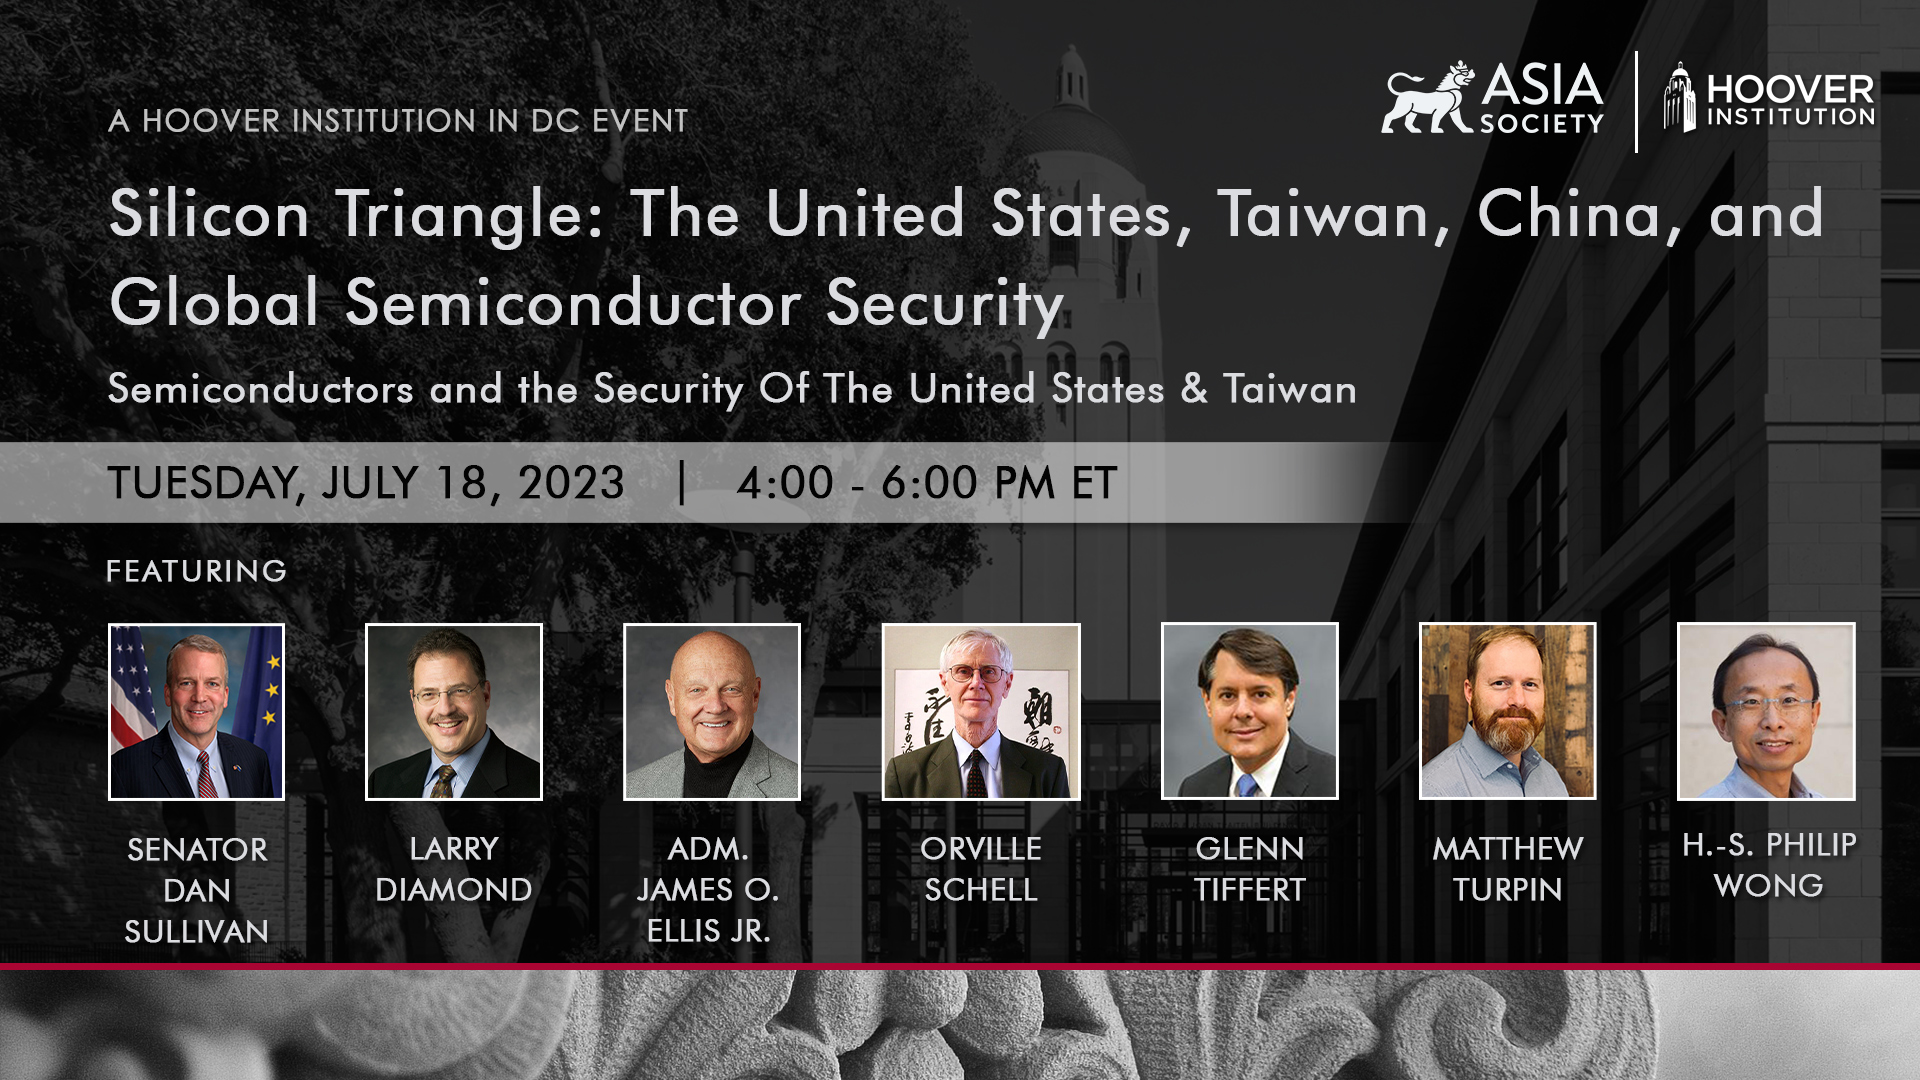 Silicon Triangle: The United States, Taiwan, China, And Global Semiconductor Security